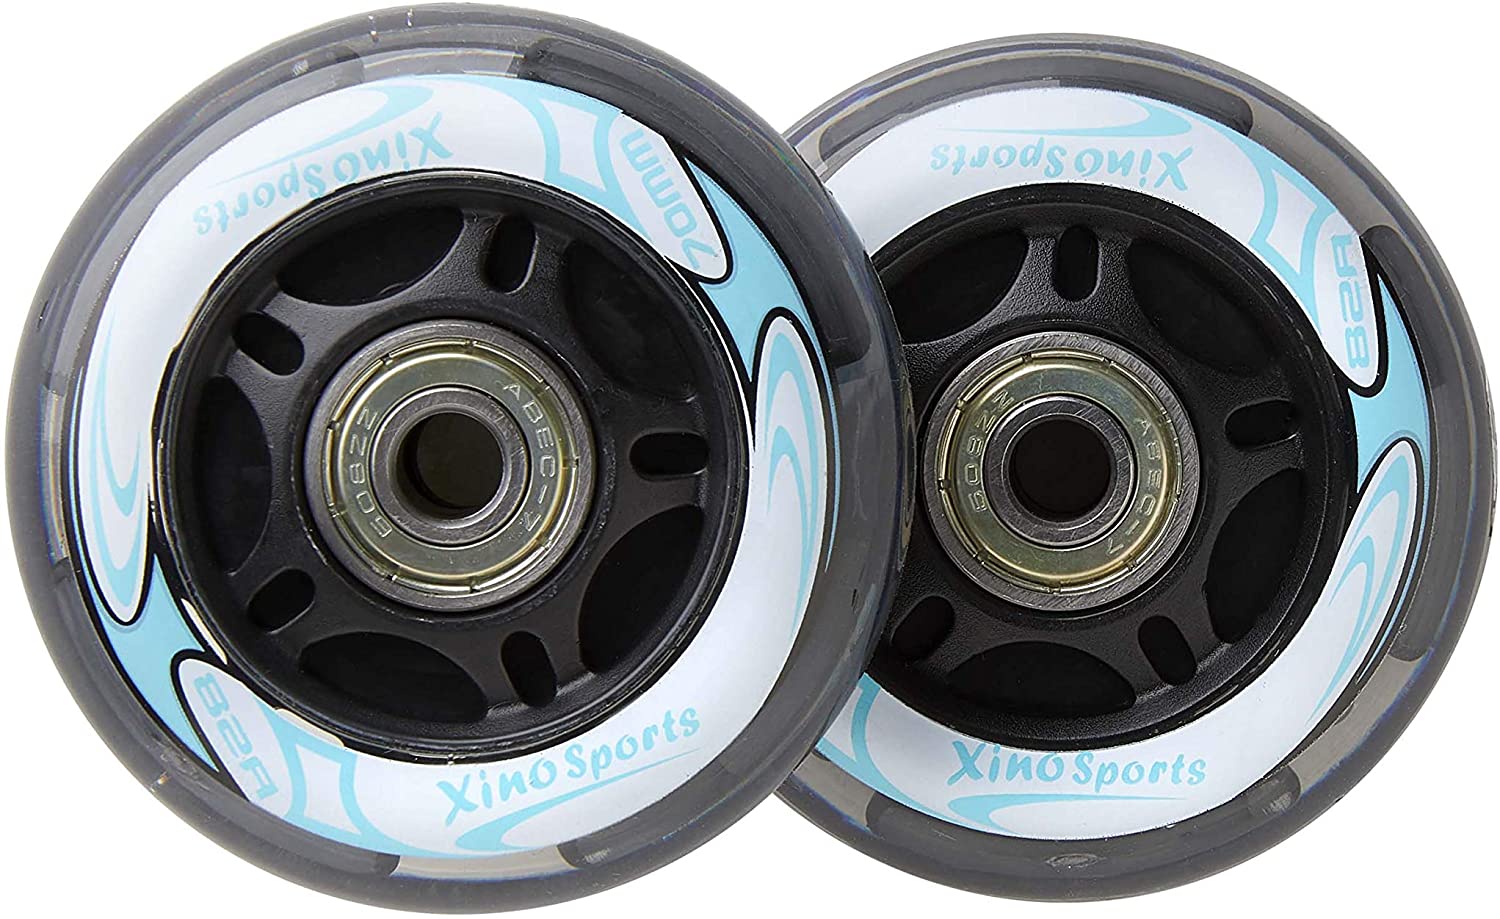 Roller Blades Replacement Wheels - Xino Sports